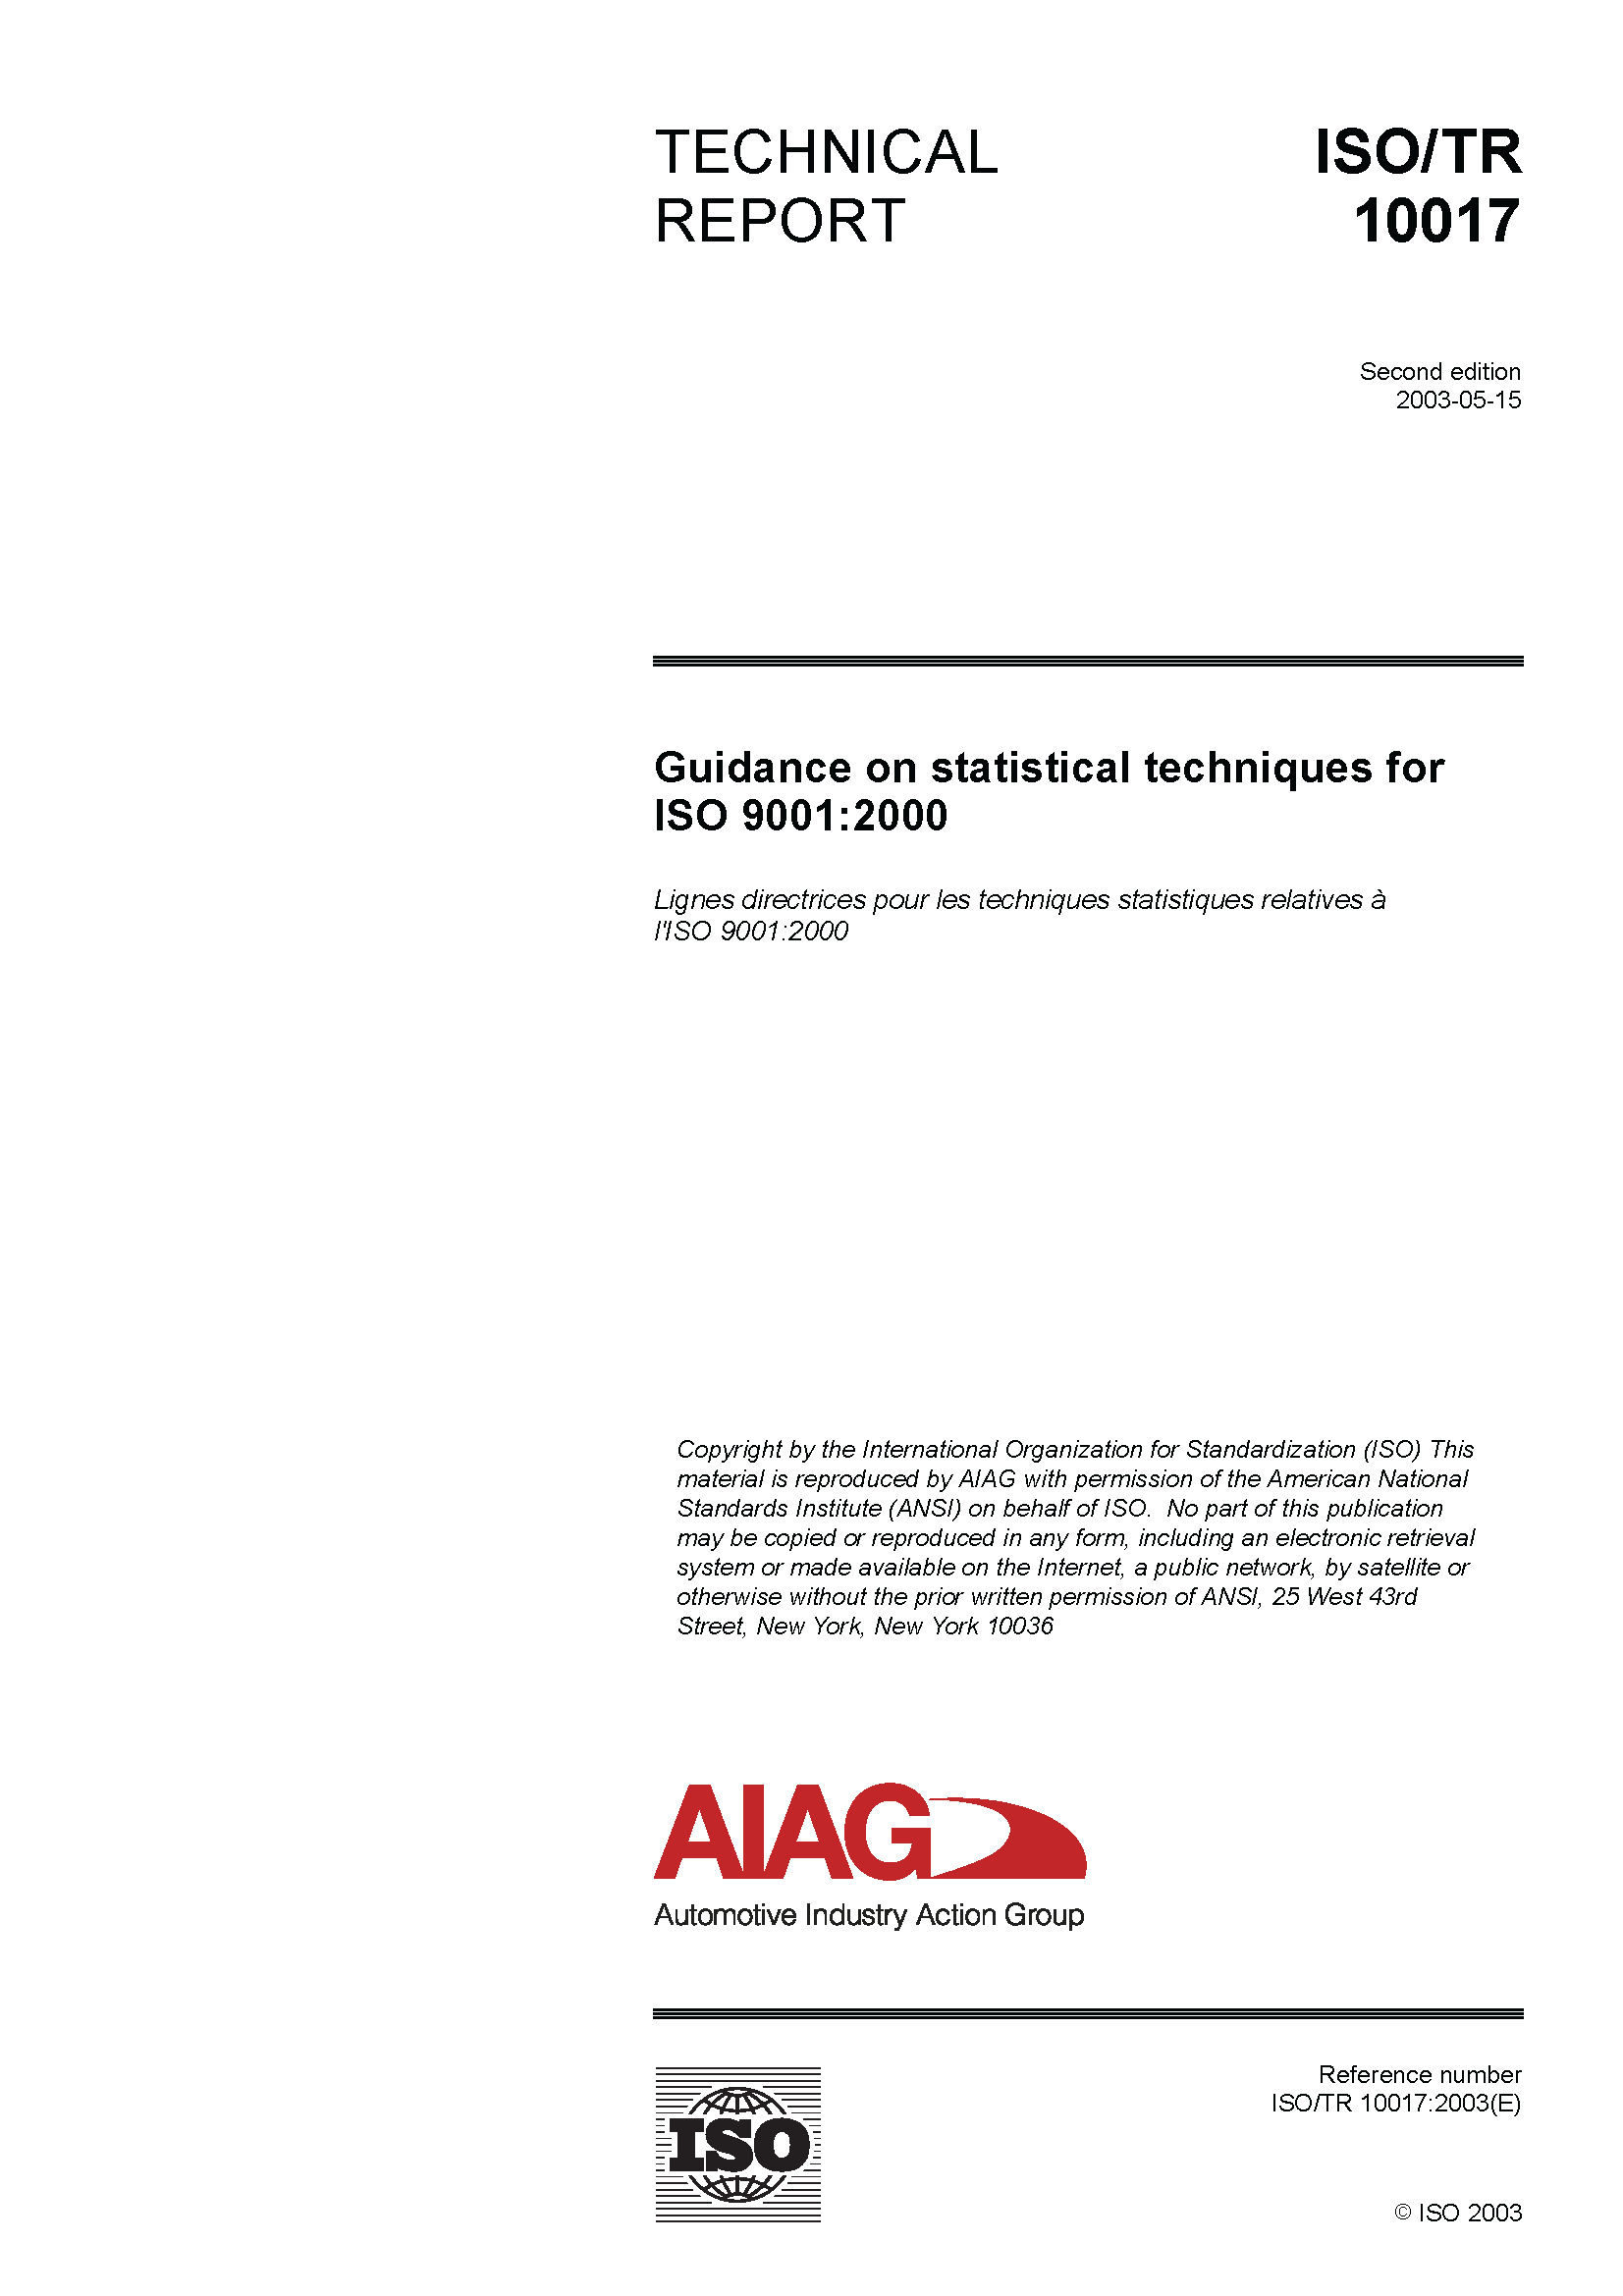 AIAG Guidance on Statistical Techniques for ISO 9001:2000 (1.5.2003)